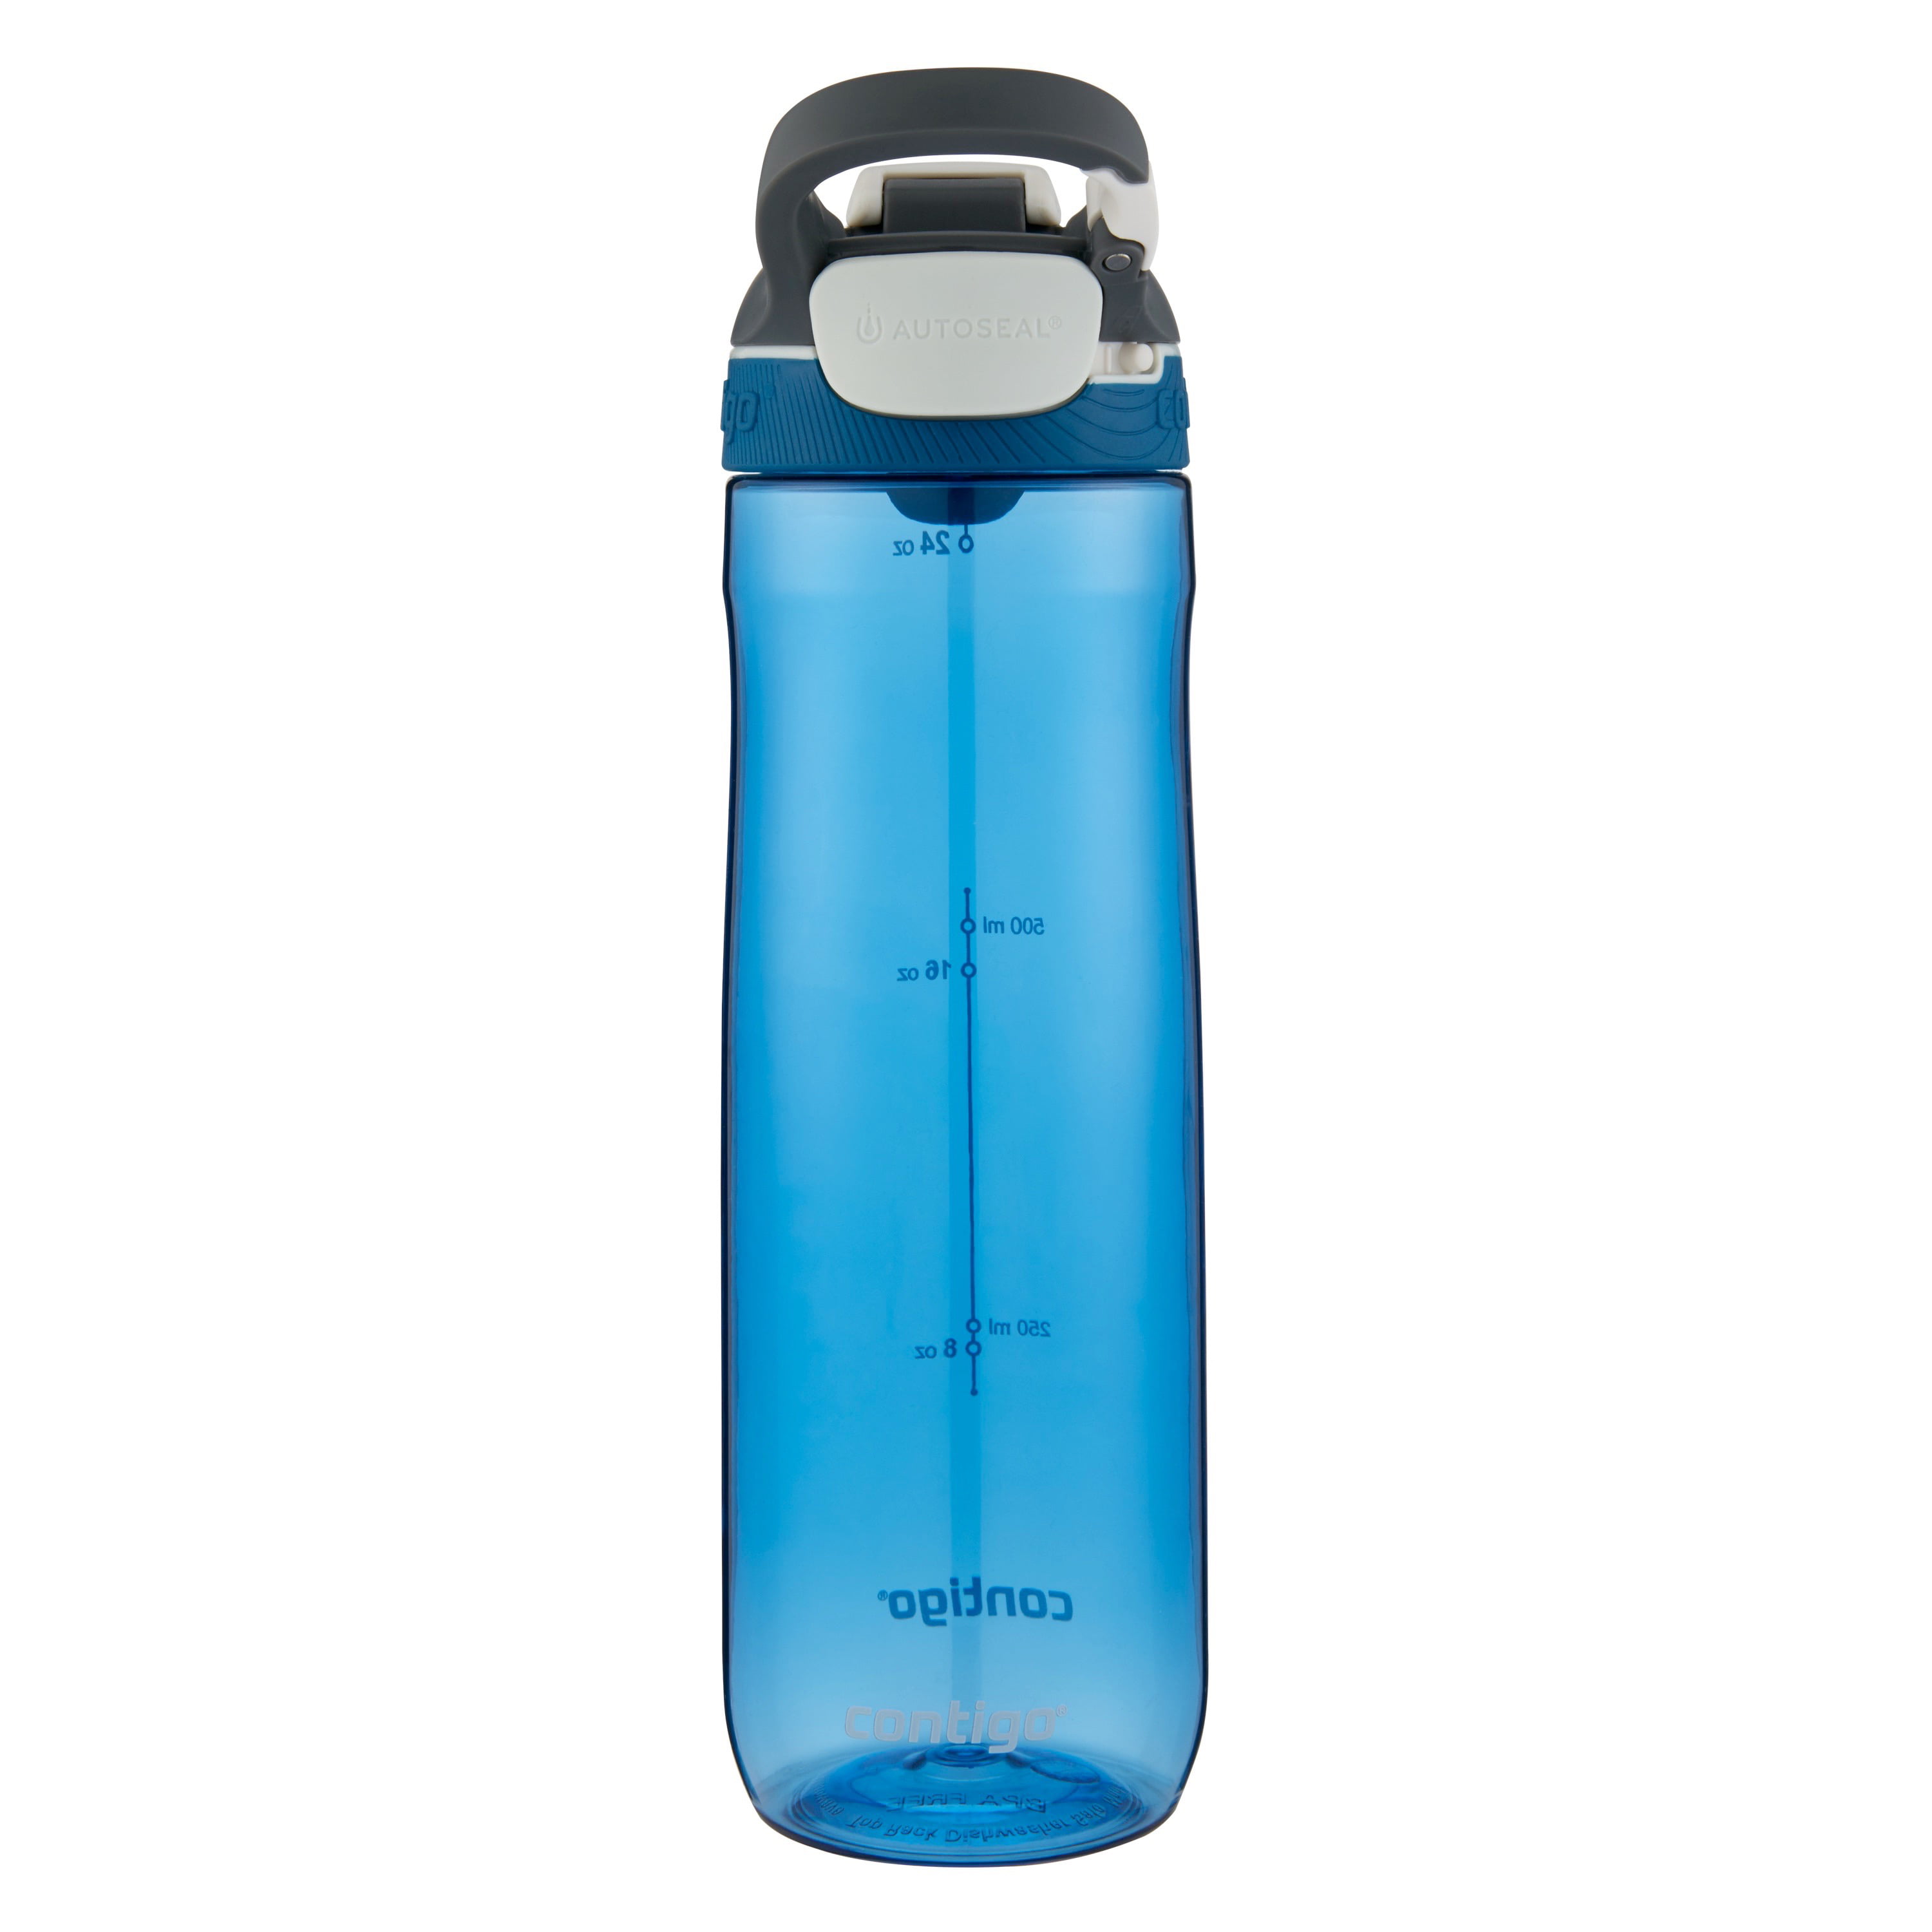 AUTOSEAL® Chill, 24oz, SS Monaco Stainless Steel Water Bottle